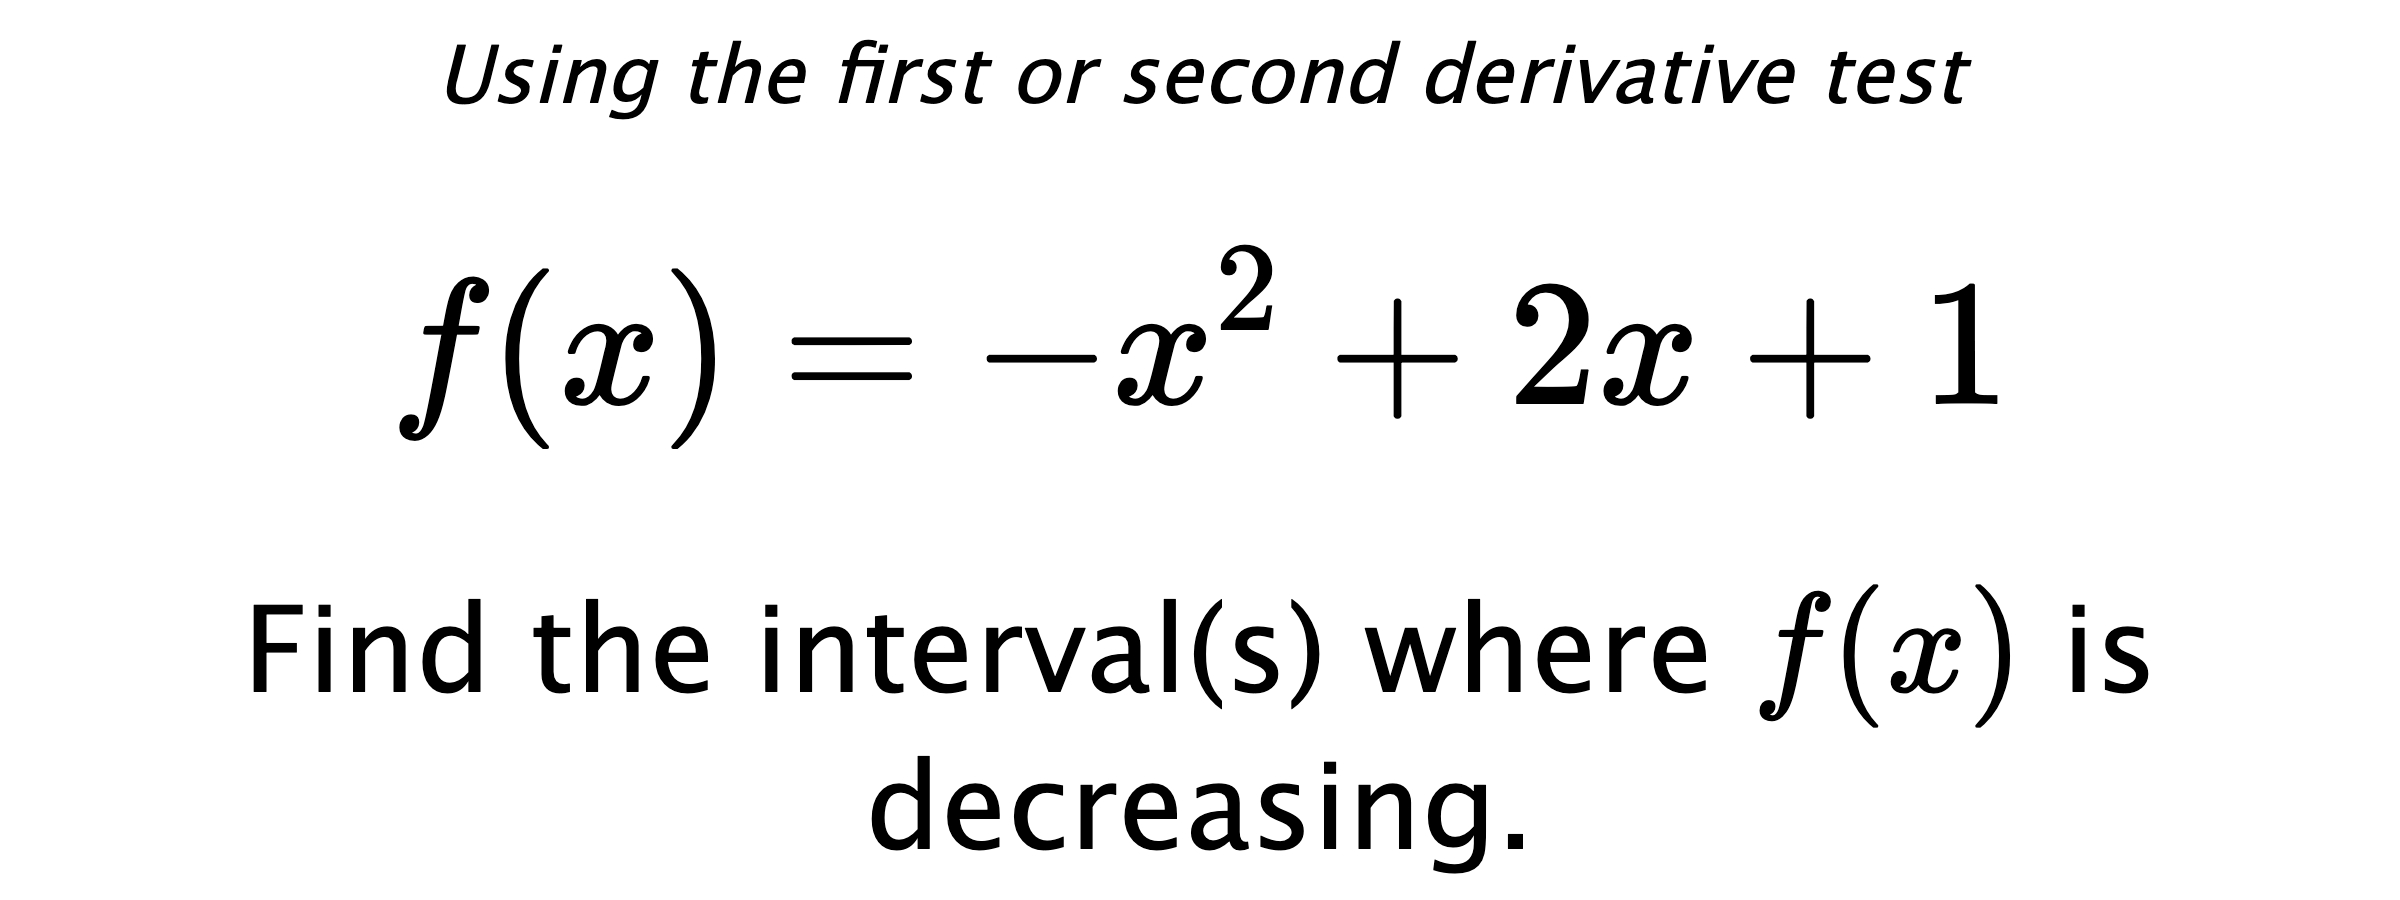 Using the first or second derivative test $$ f(x)=-x^2+2x+1 $$ Find the interval(s) where $ f(x) $ is decreasing.